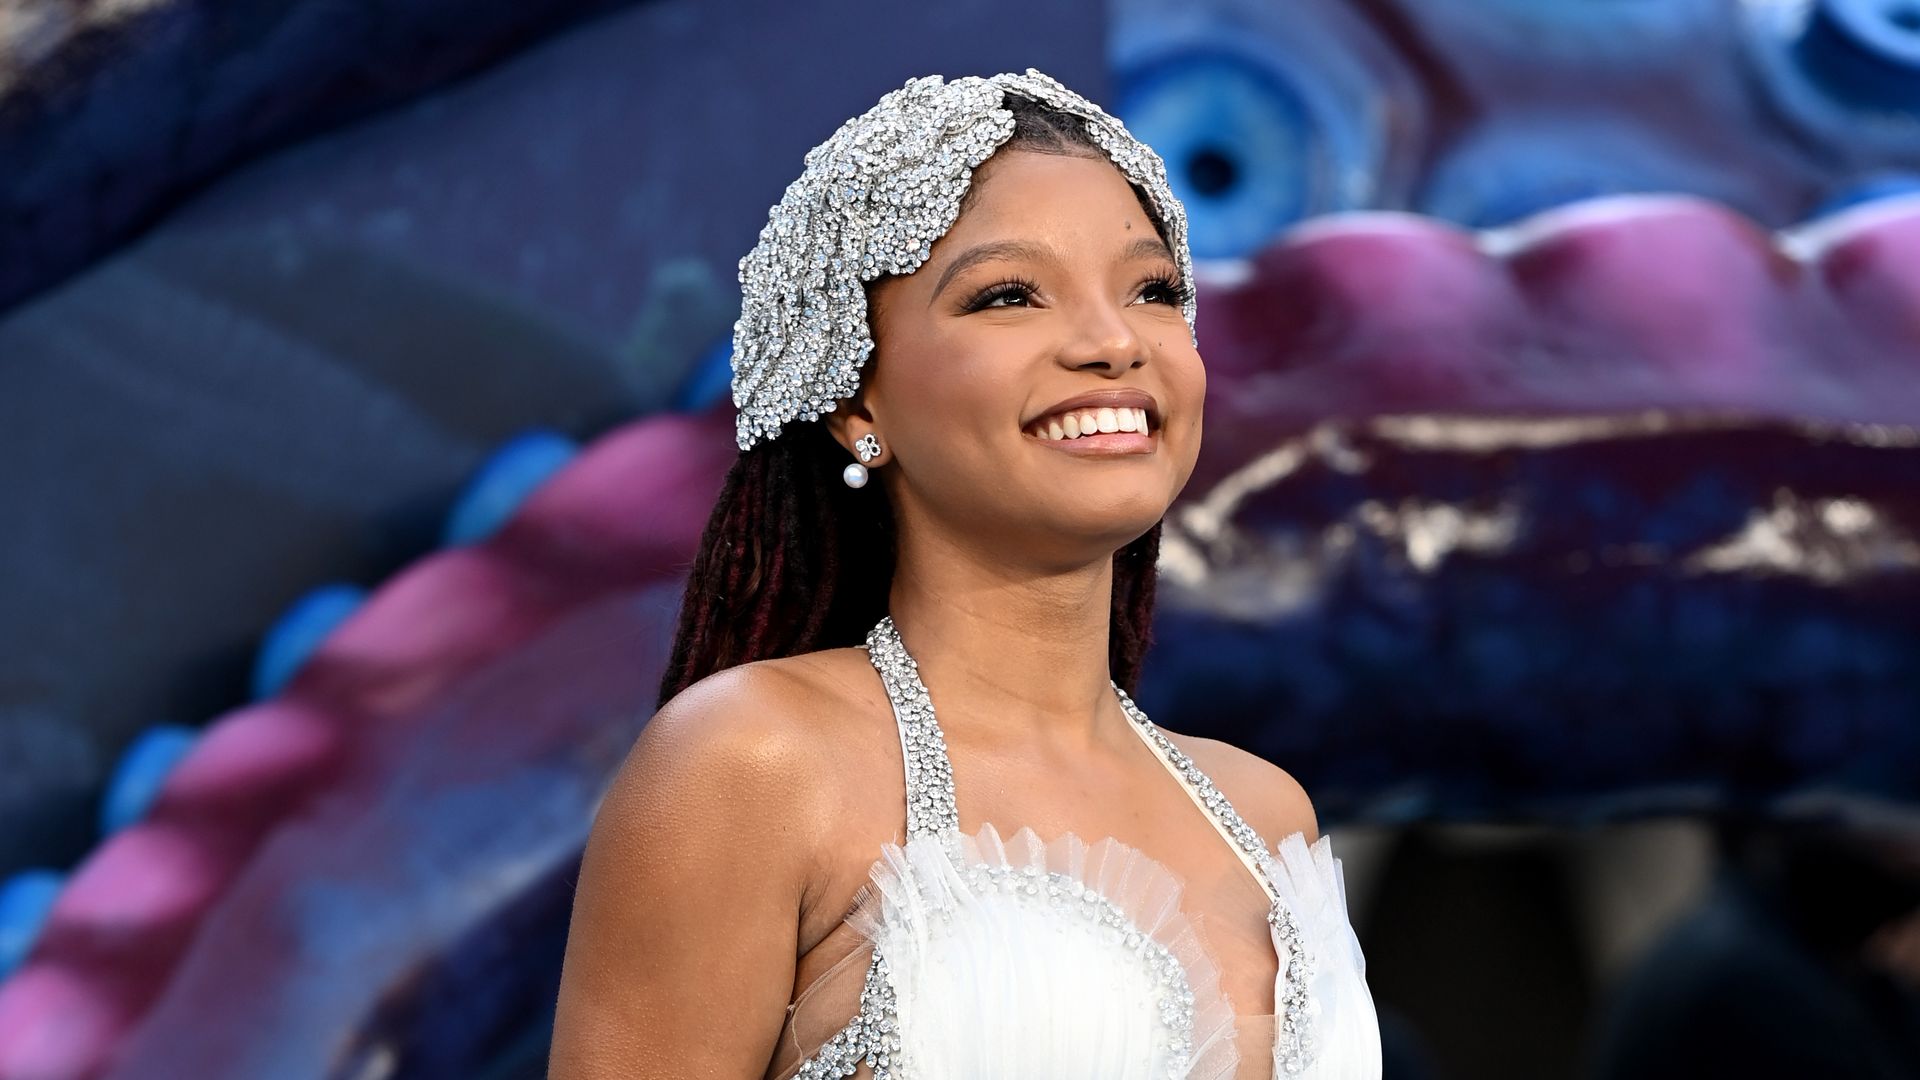 Halle Bailey attends the UK Premiere of Disney's "The Little Mermaid" on May 15, 2023 in London, England.